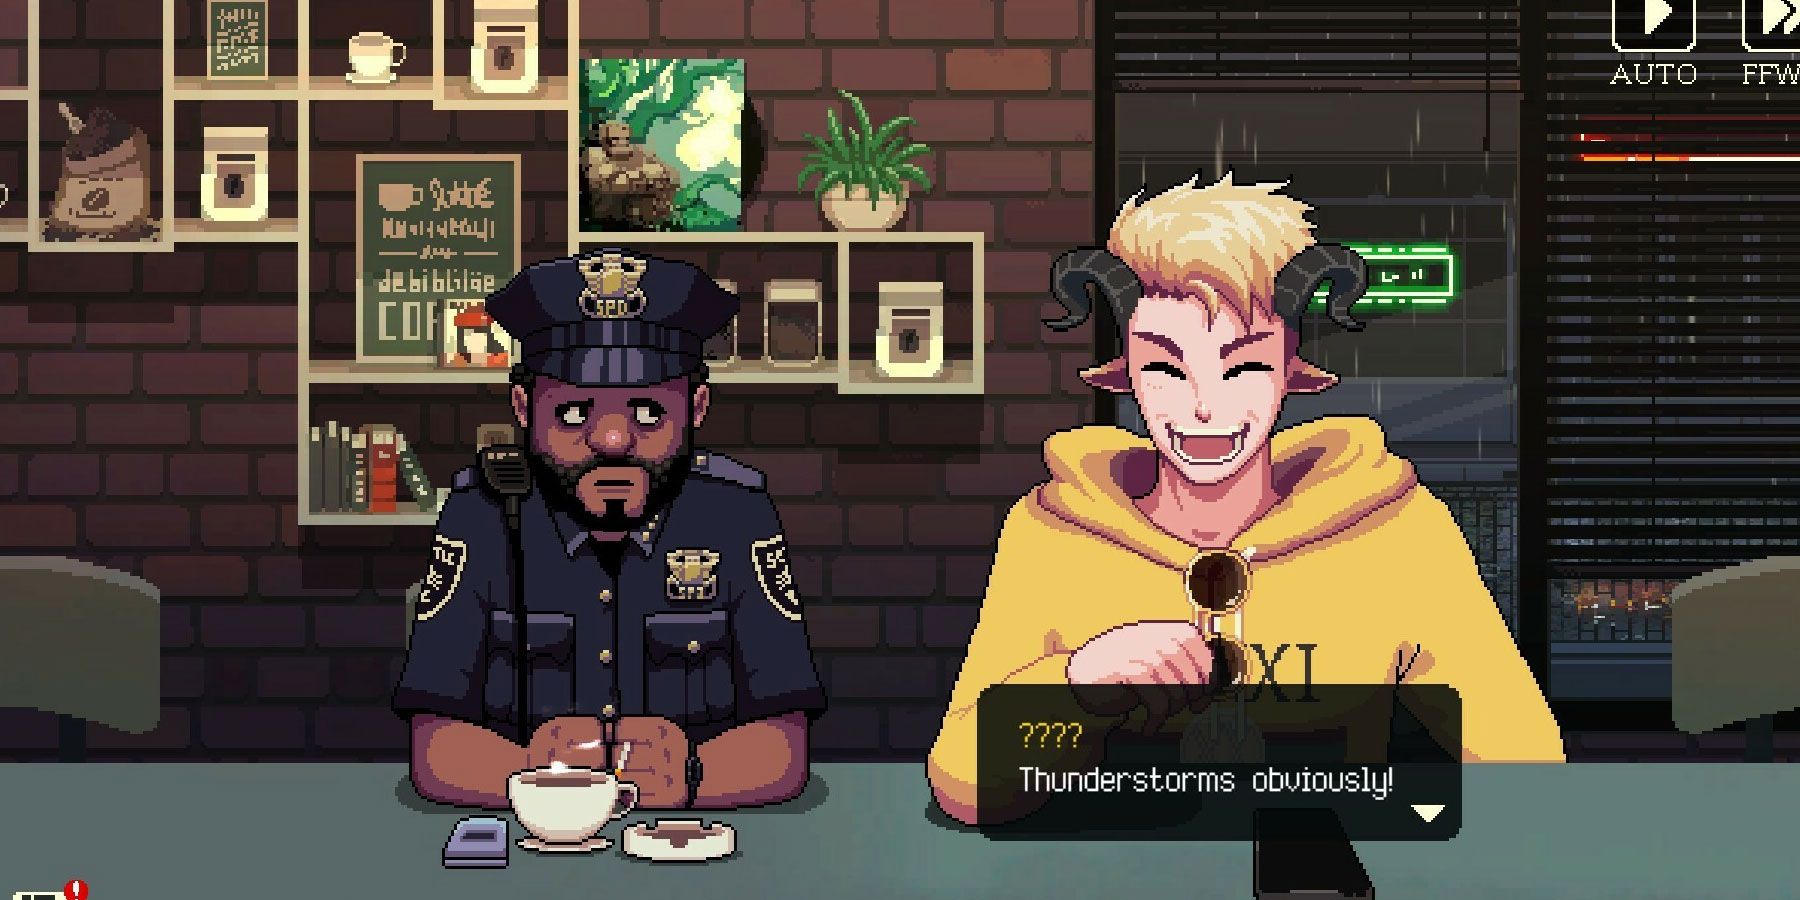 Coffee-Talk-Episode-2-visual-novel-officer-and-horned-character